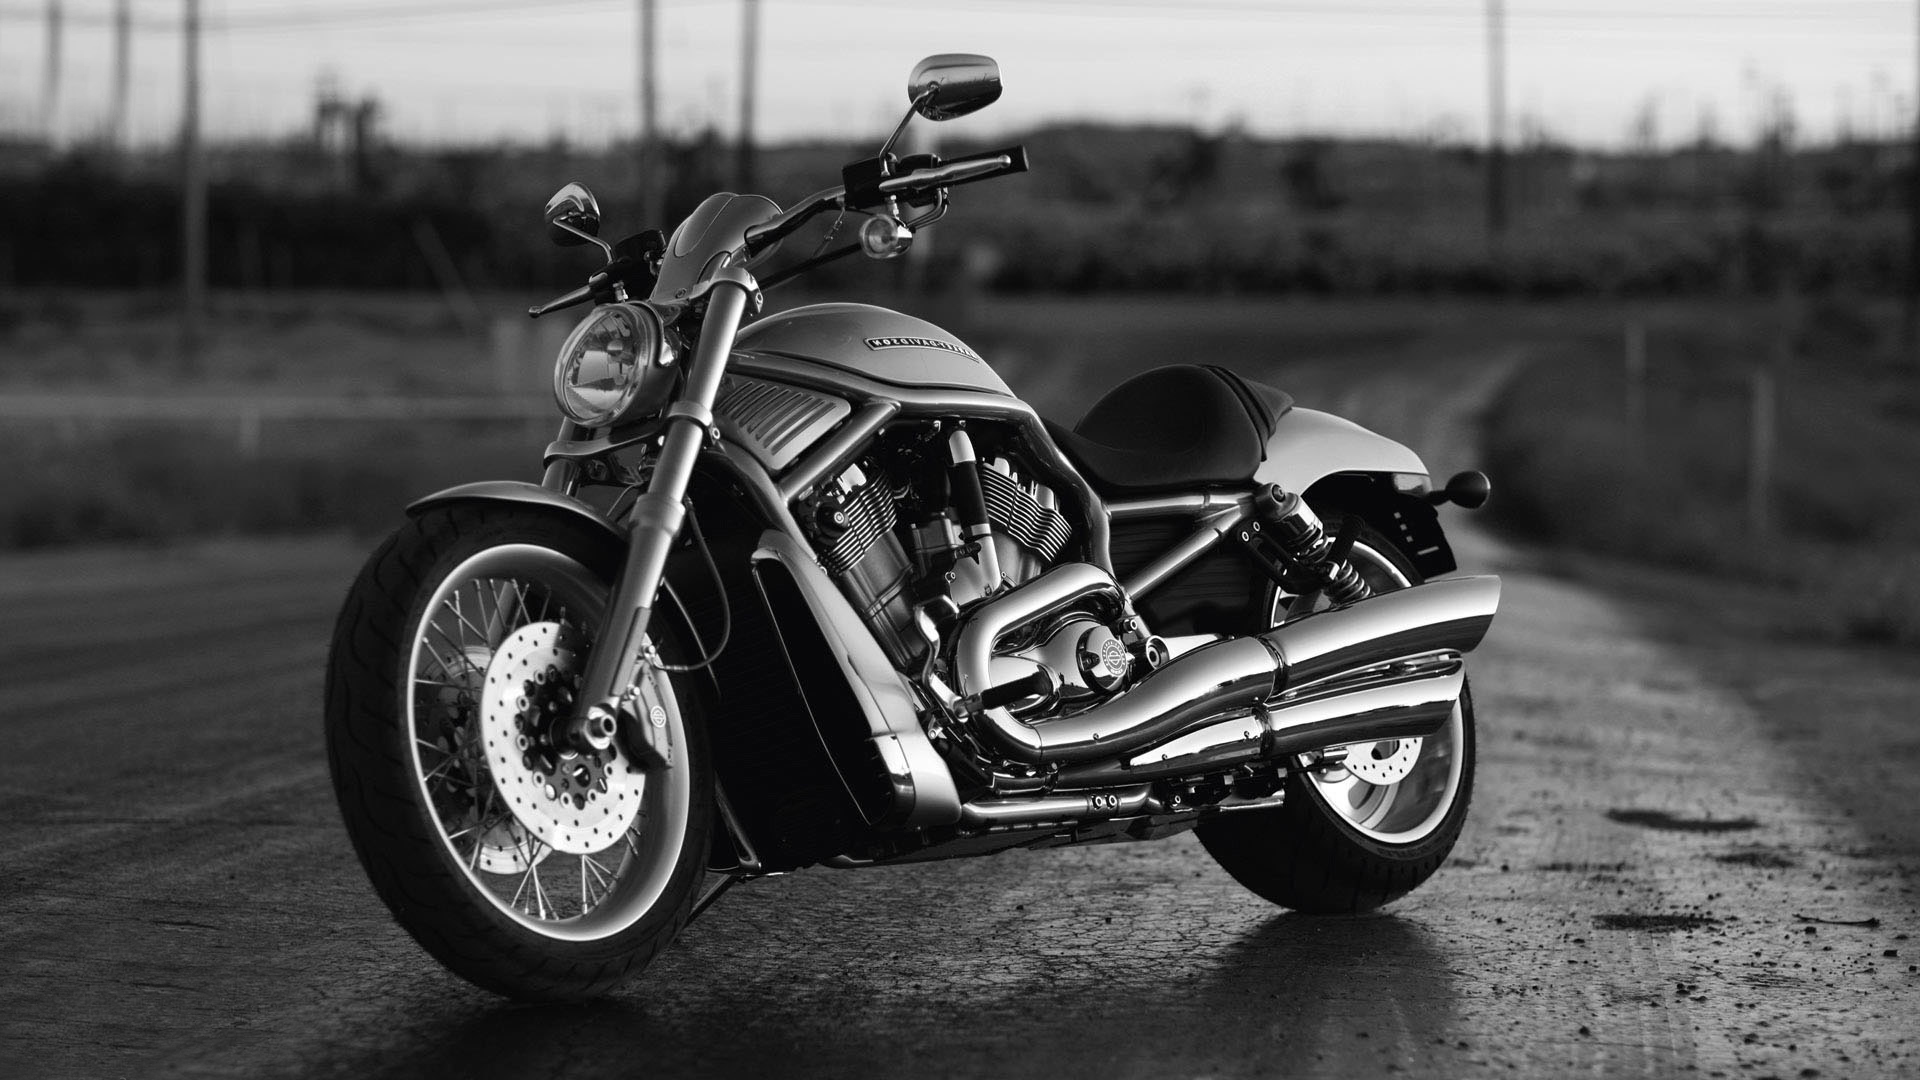 Harley Davidson Wallpaper Mobile With Resolution